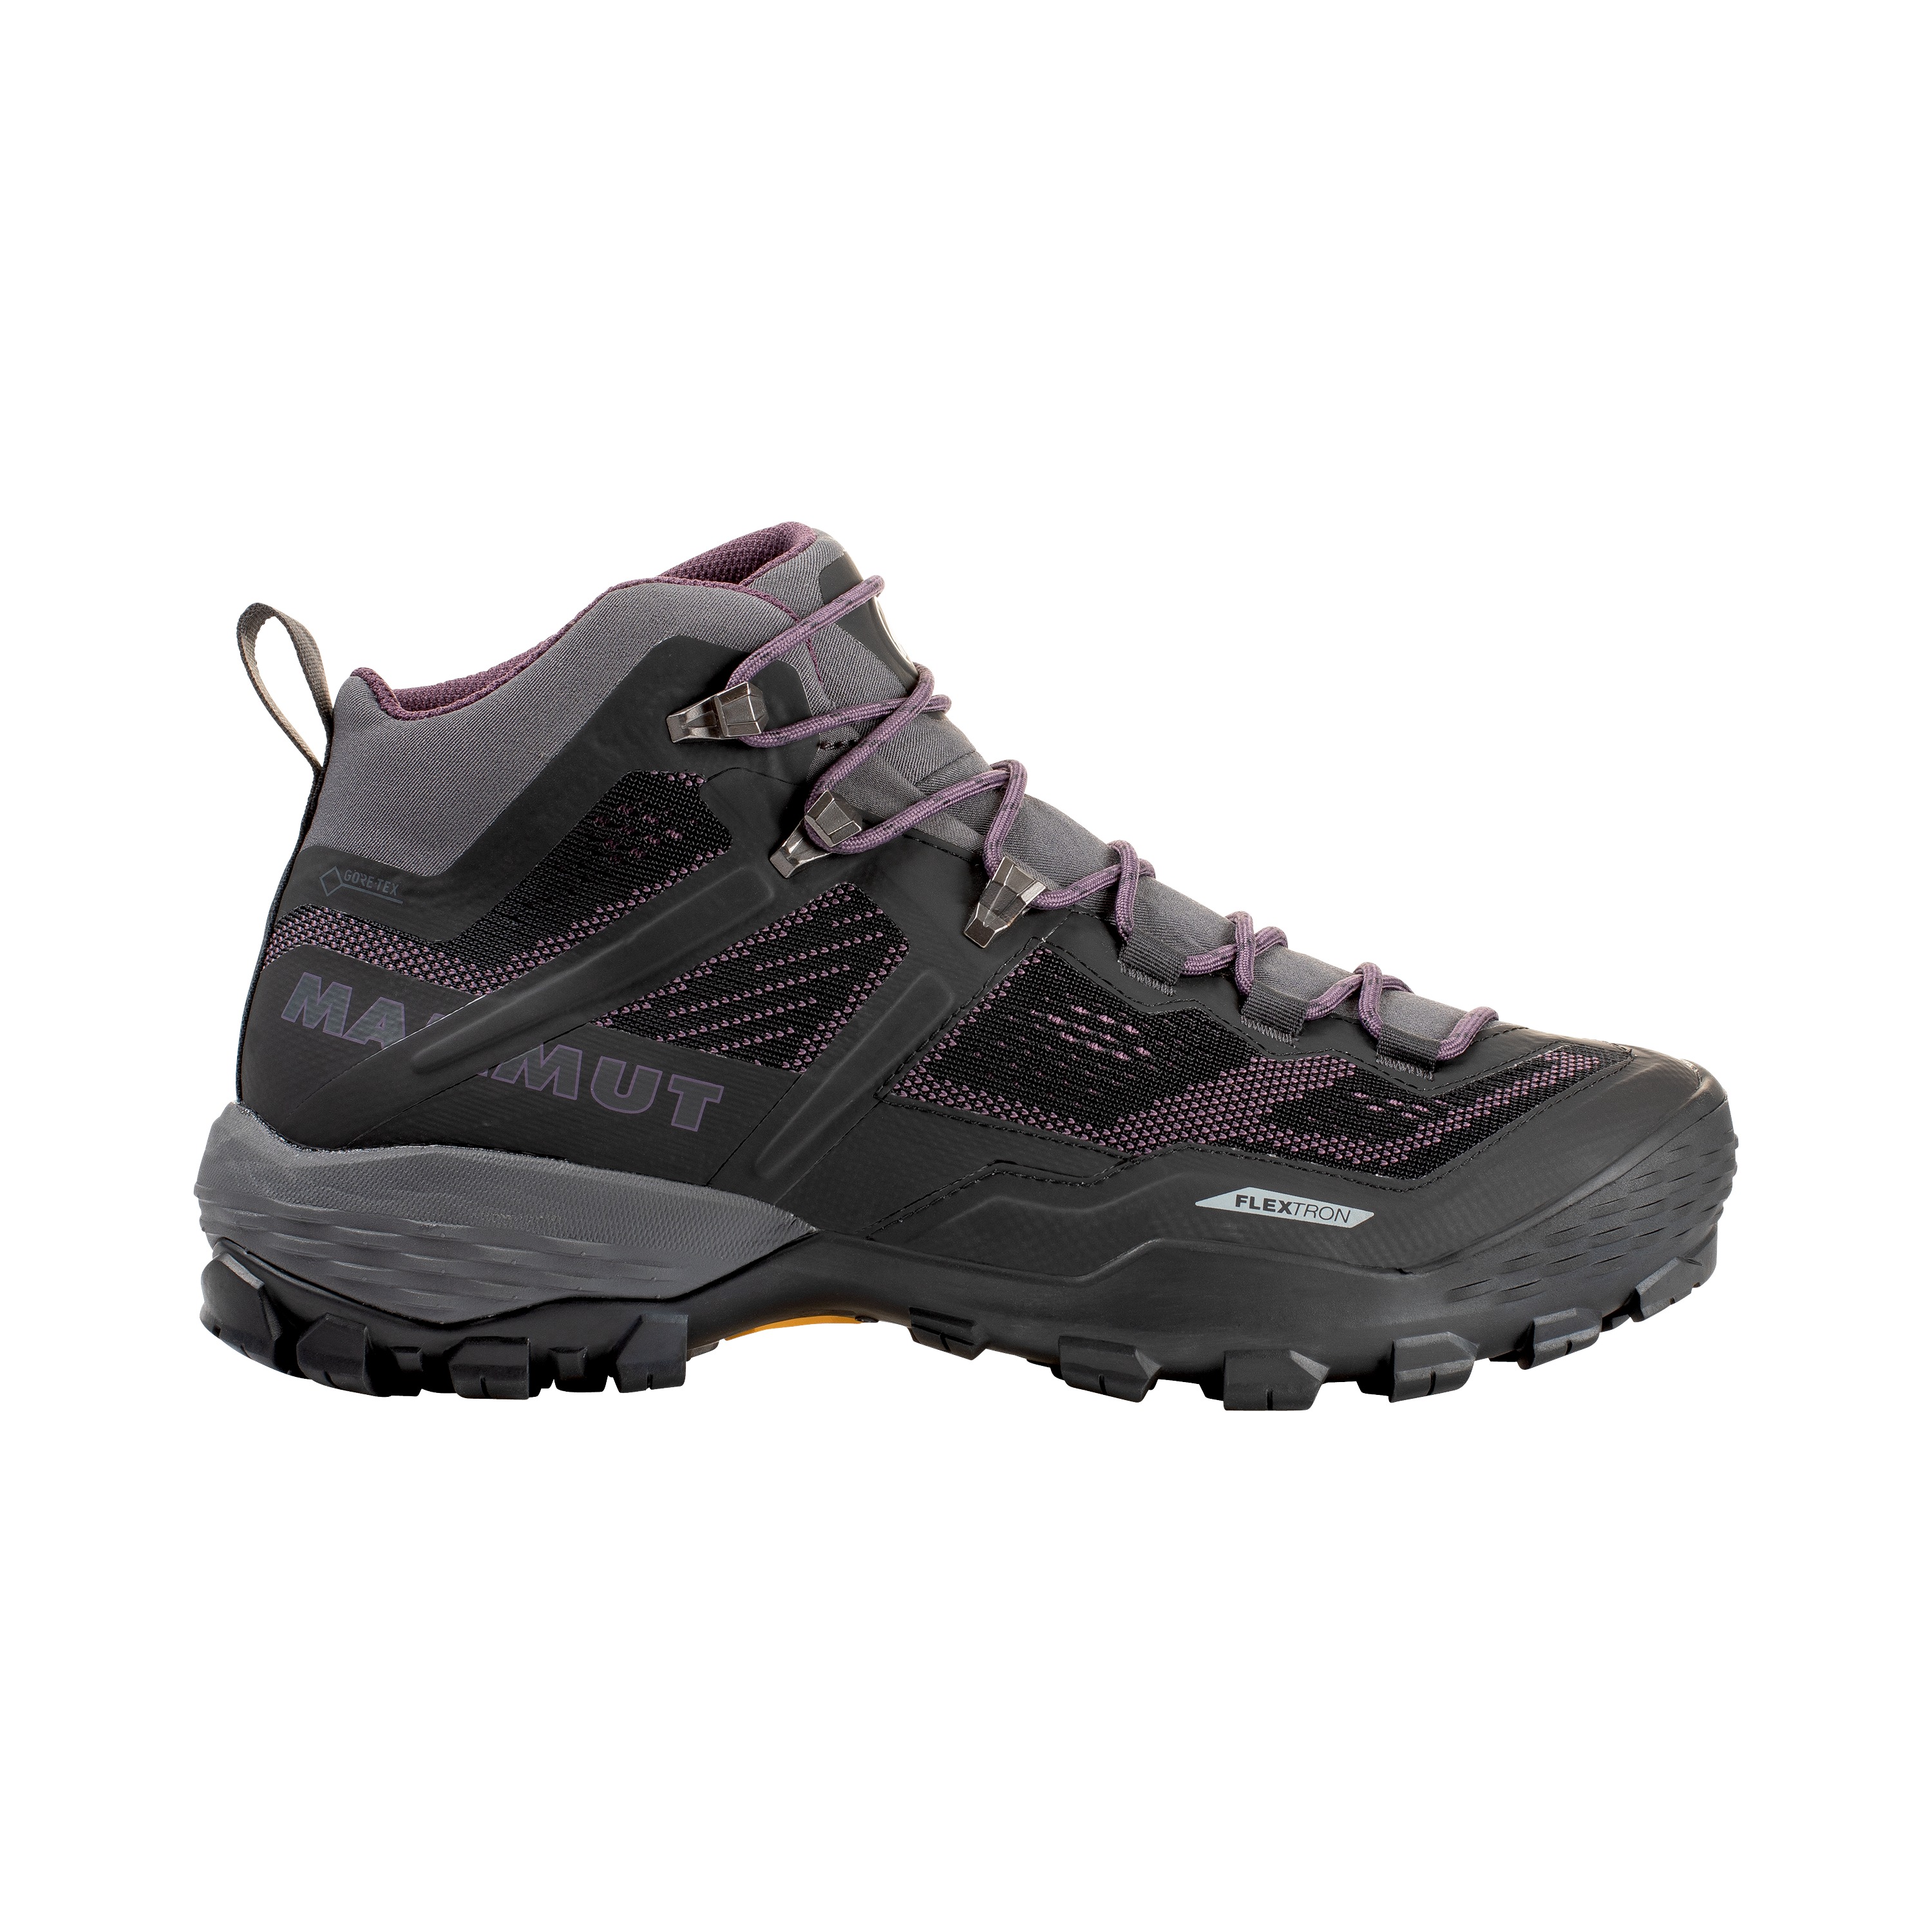 Mammut Ducan Mid GTX Backpacking Shoes - Women's | Up to 44% Off 4 